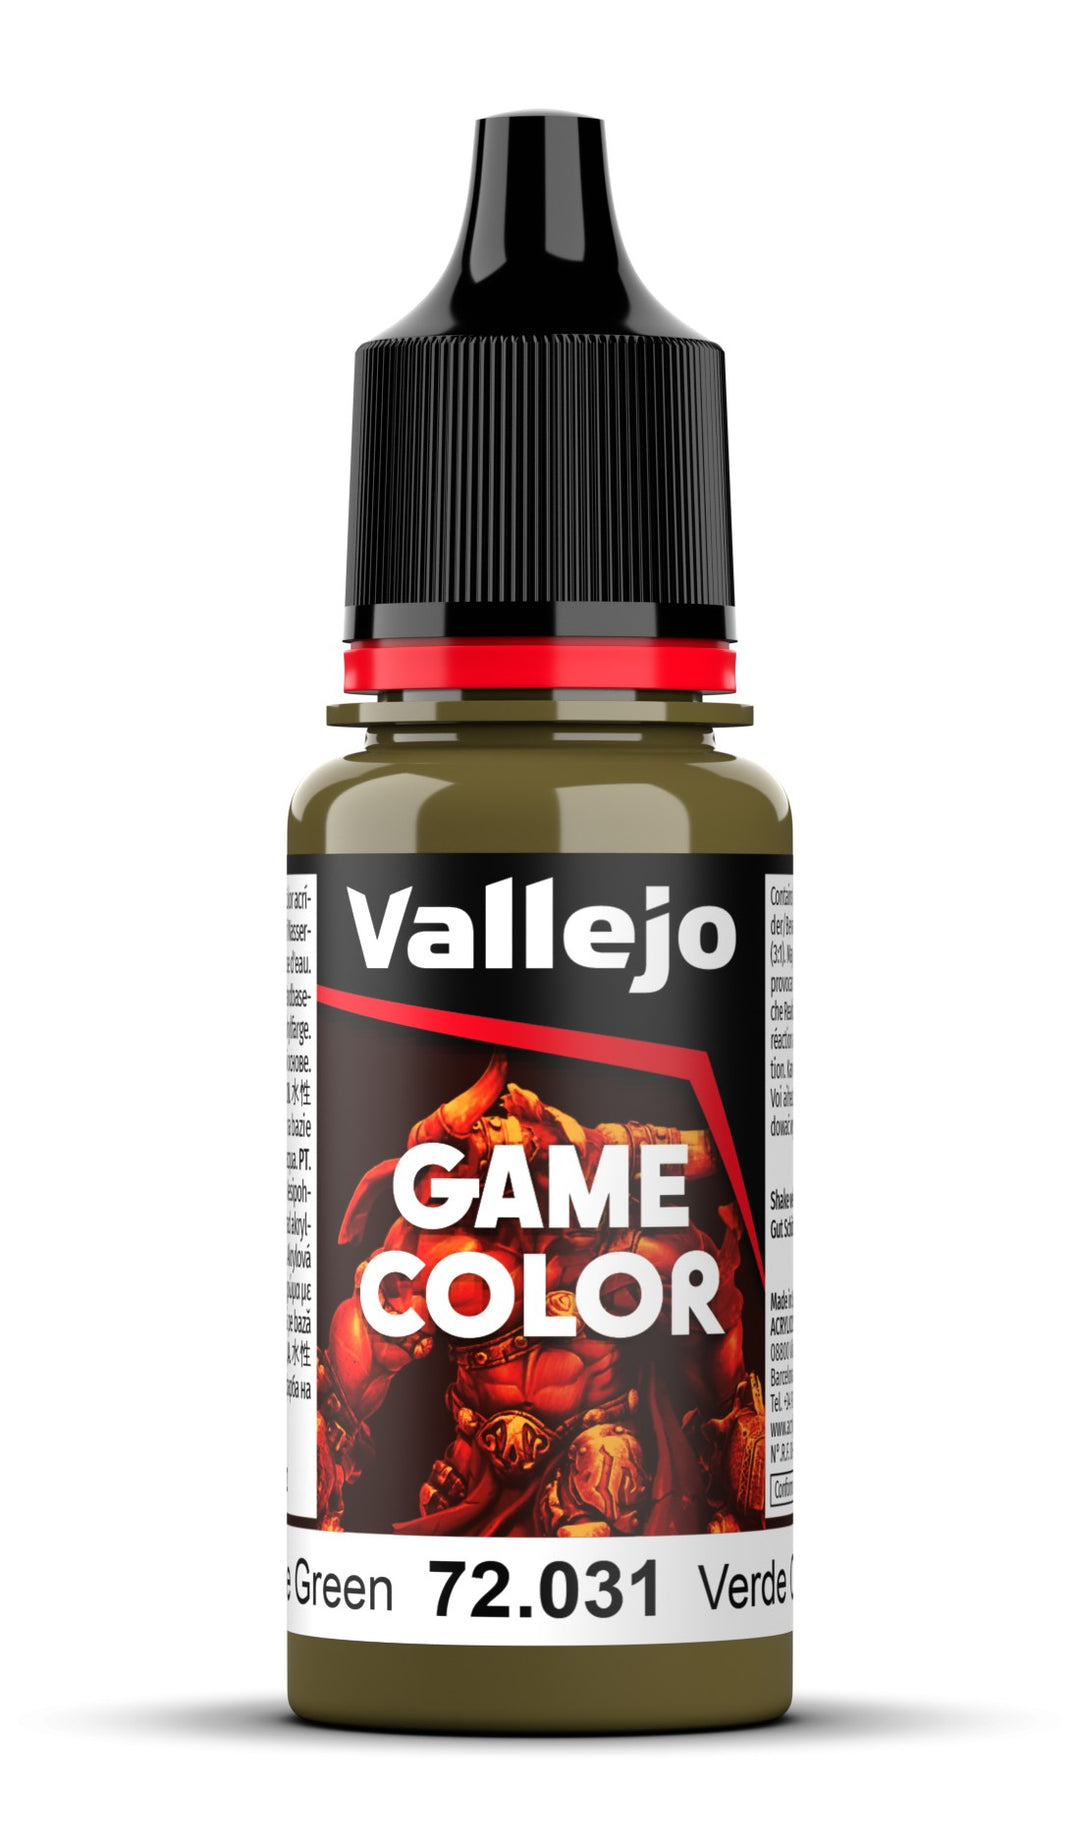 Vallejo Game Color - Camouflage Green 18 ml